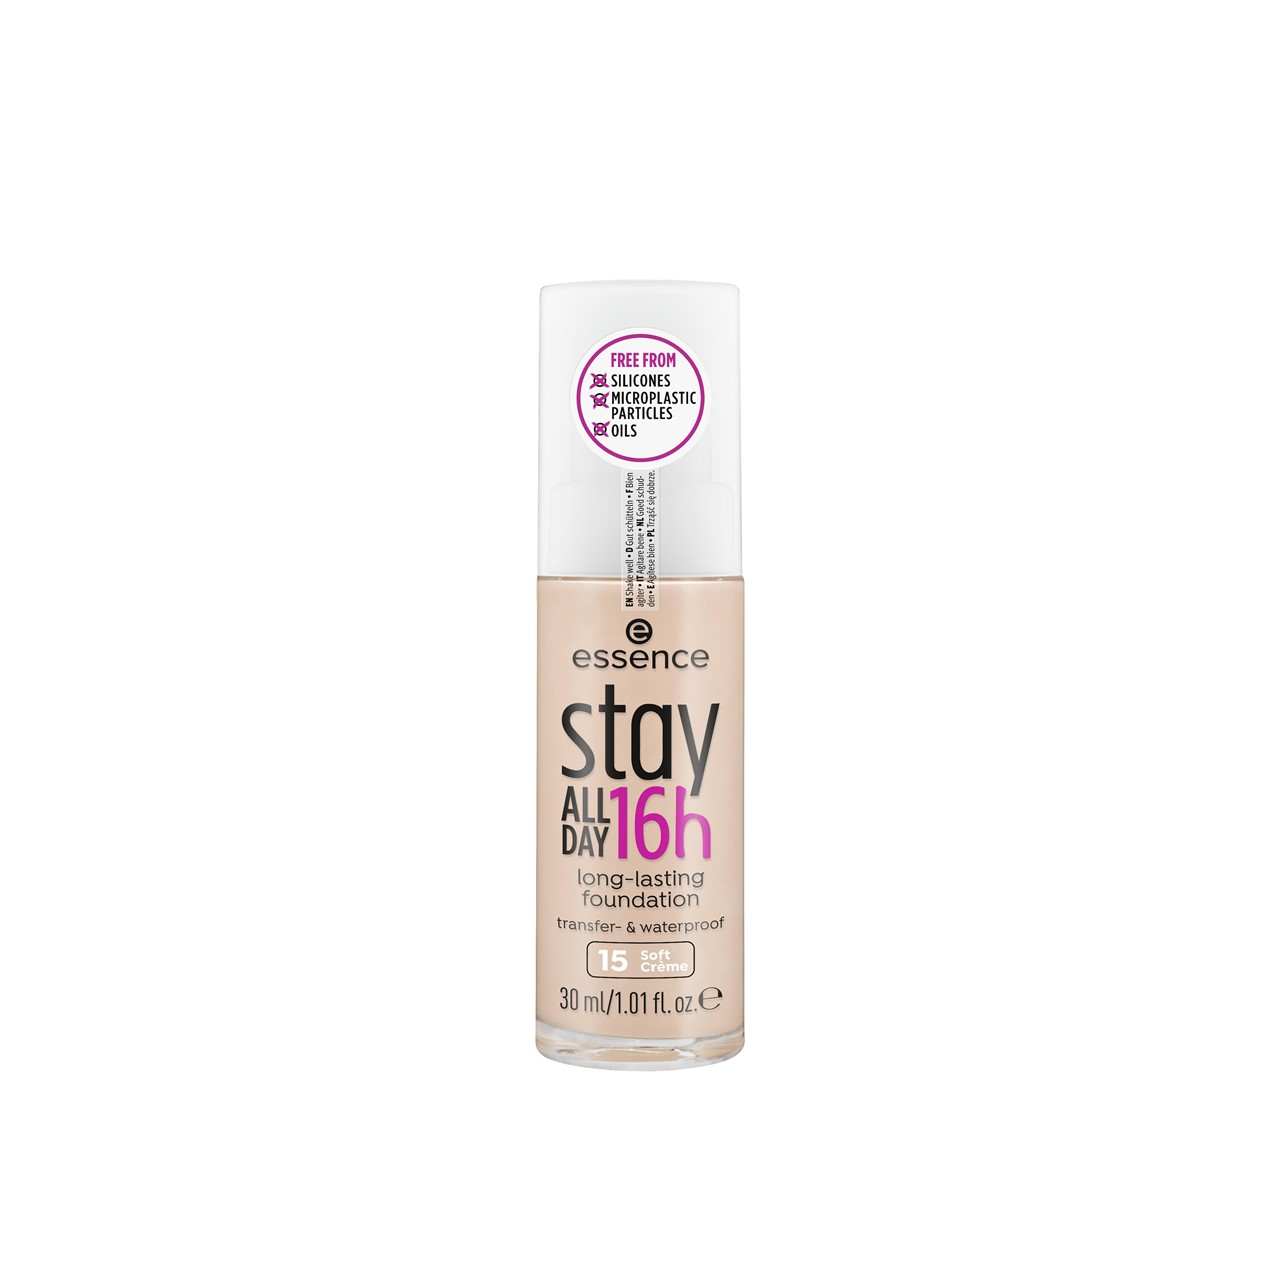 essence Stay All Day 16h Long-Lasting Foundation 15 Soft Crème 30ml